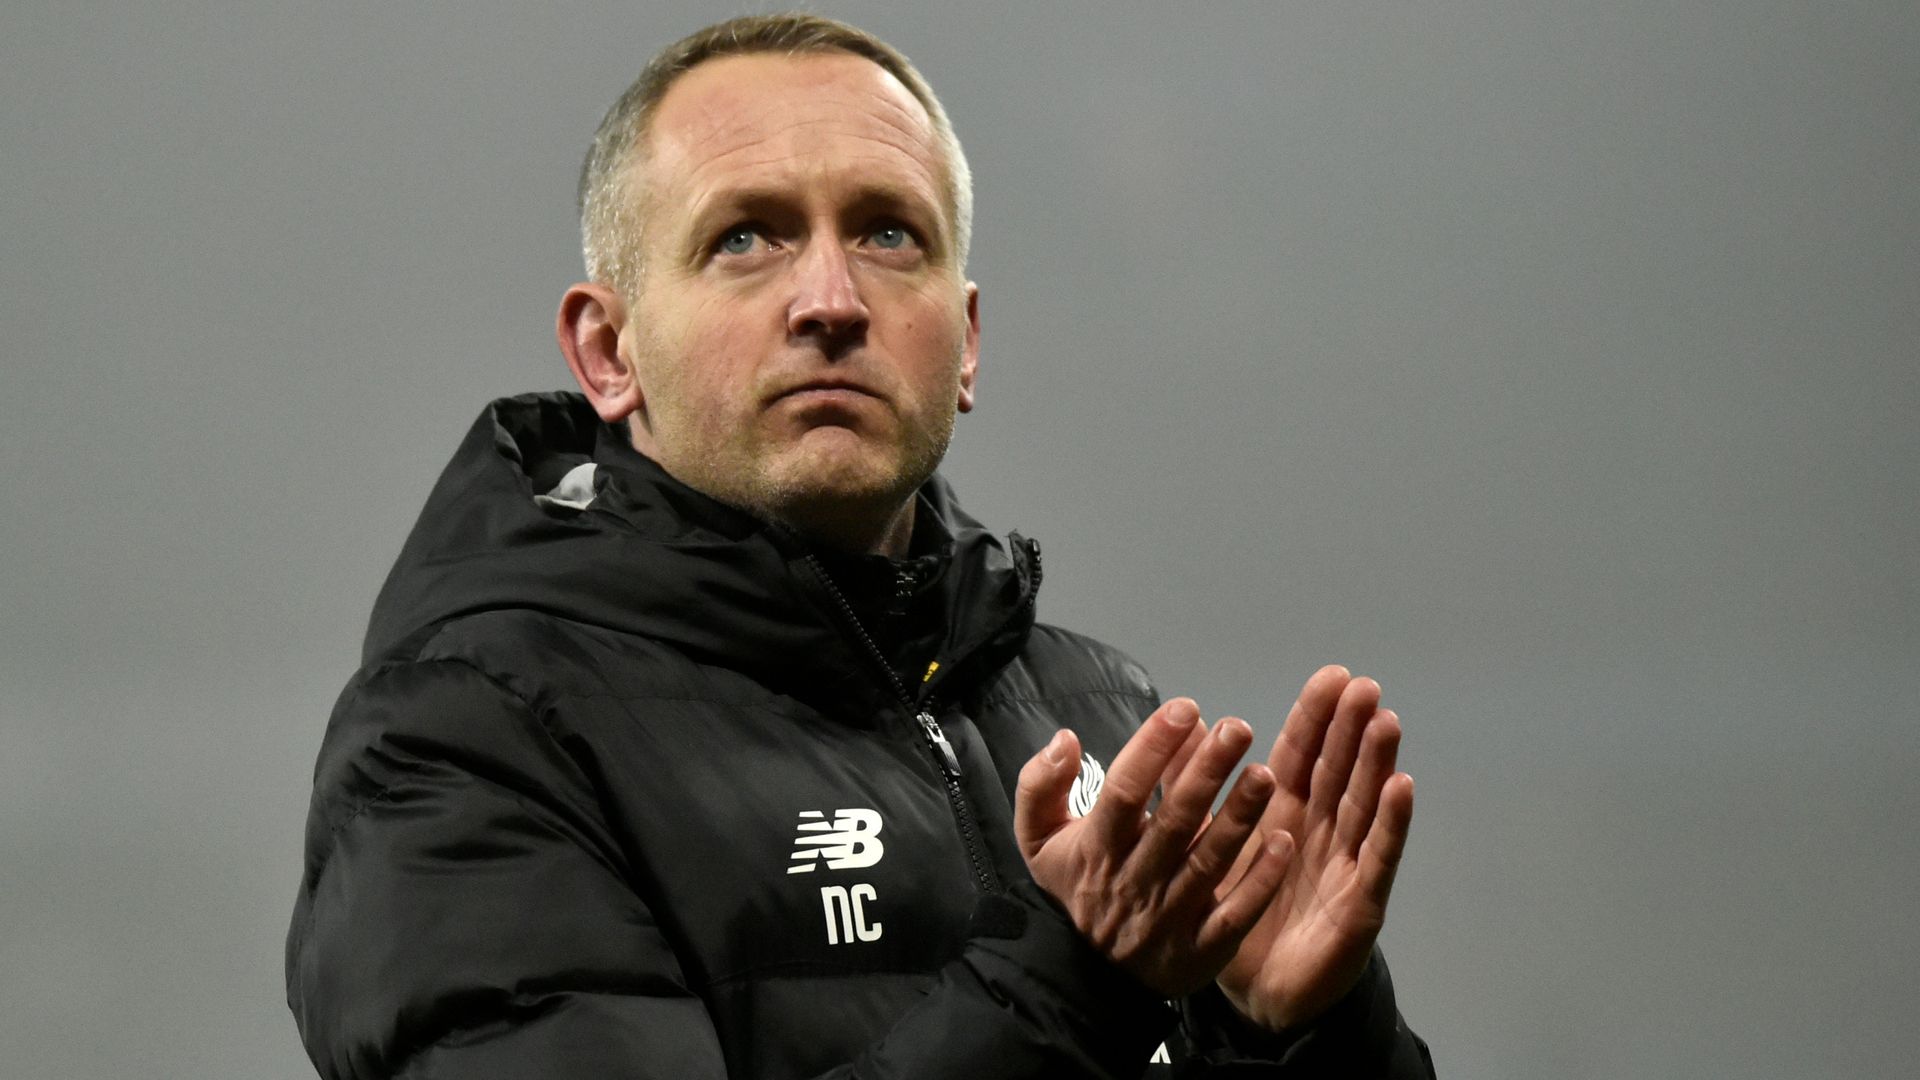 Critchley confirmed as new QPR head coach